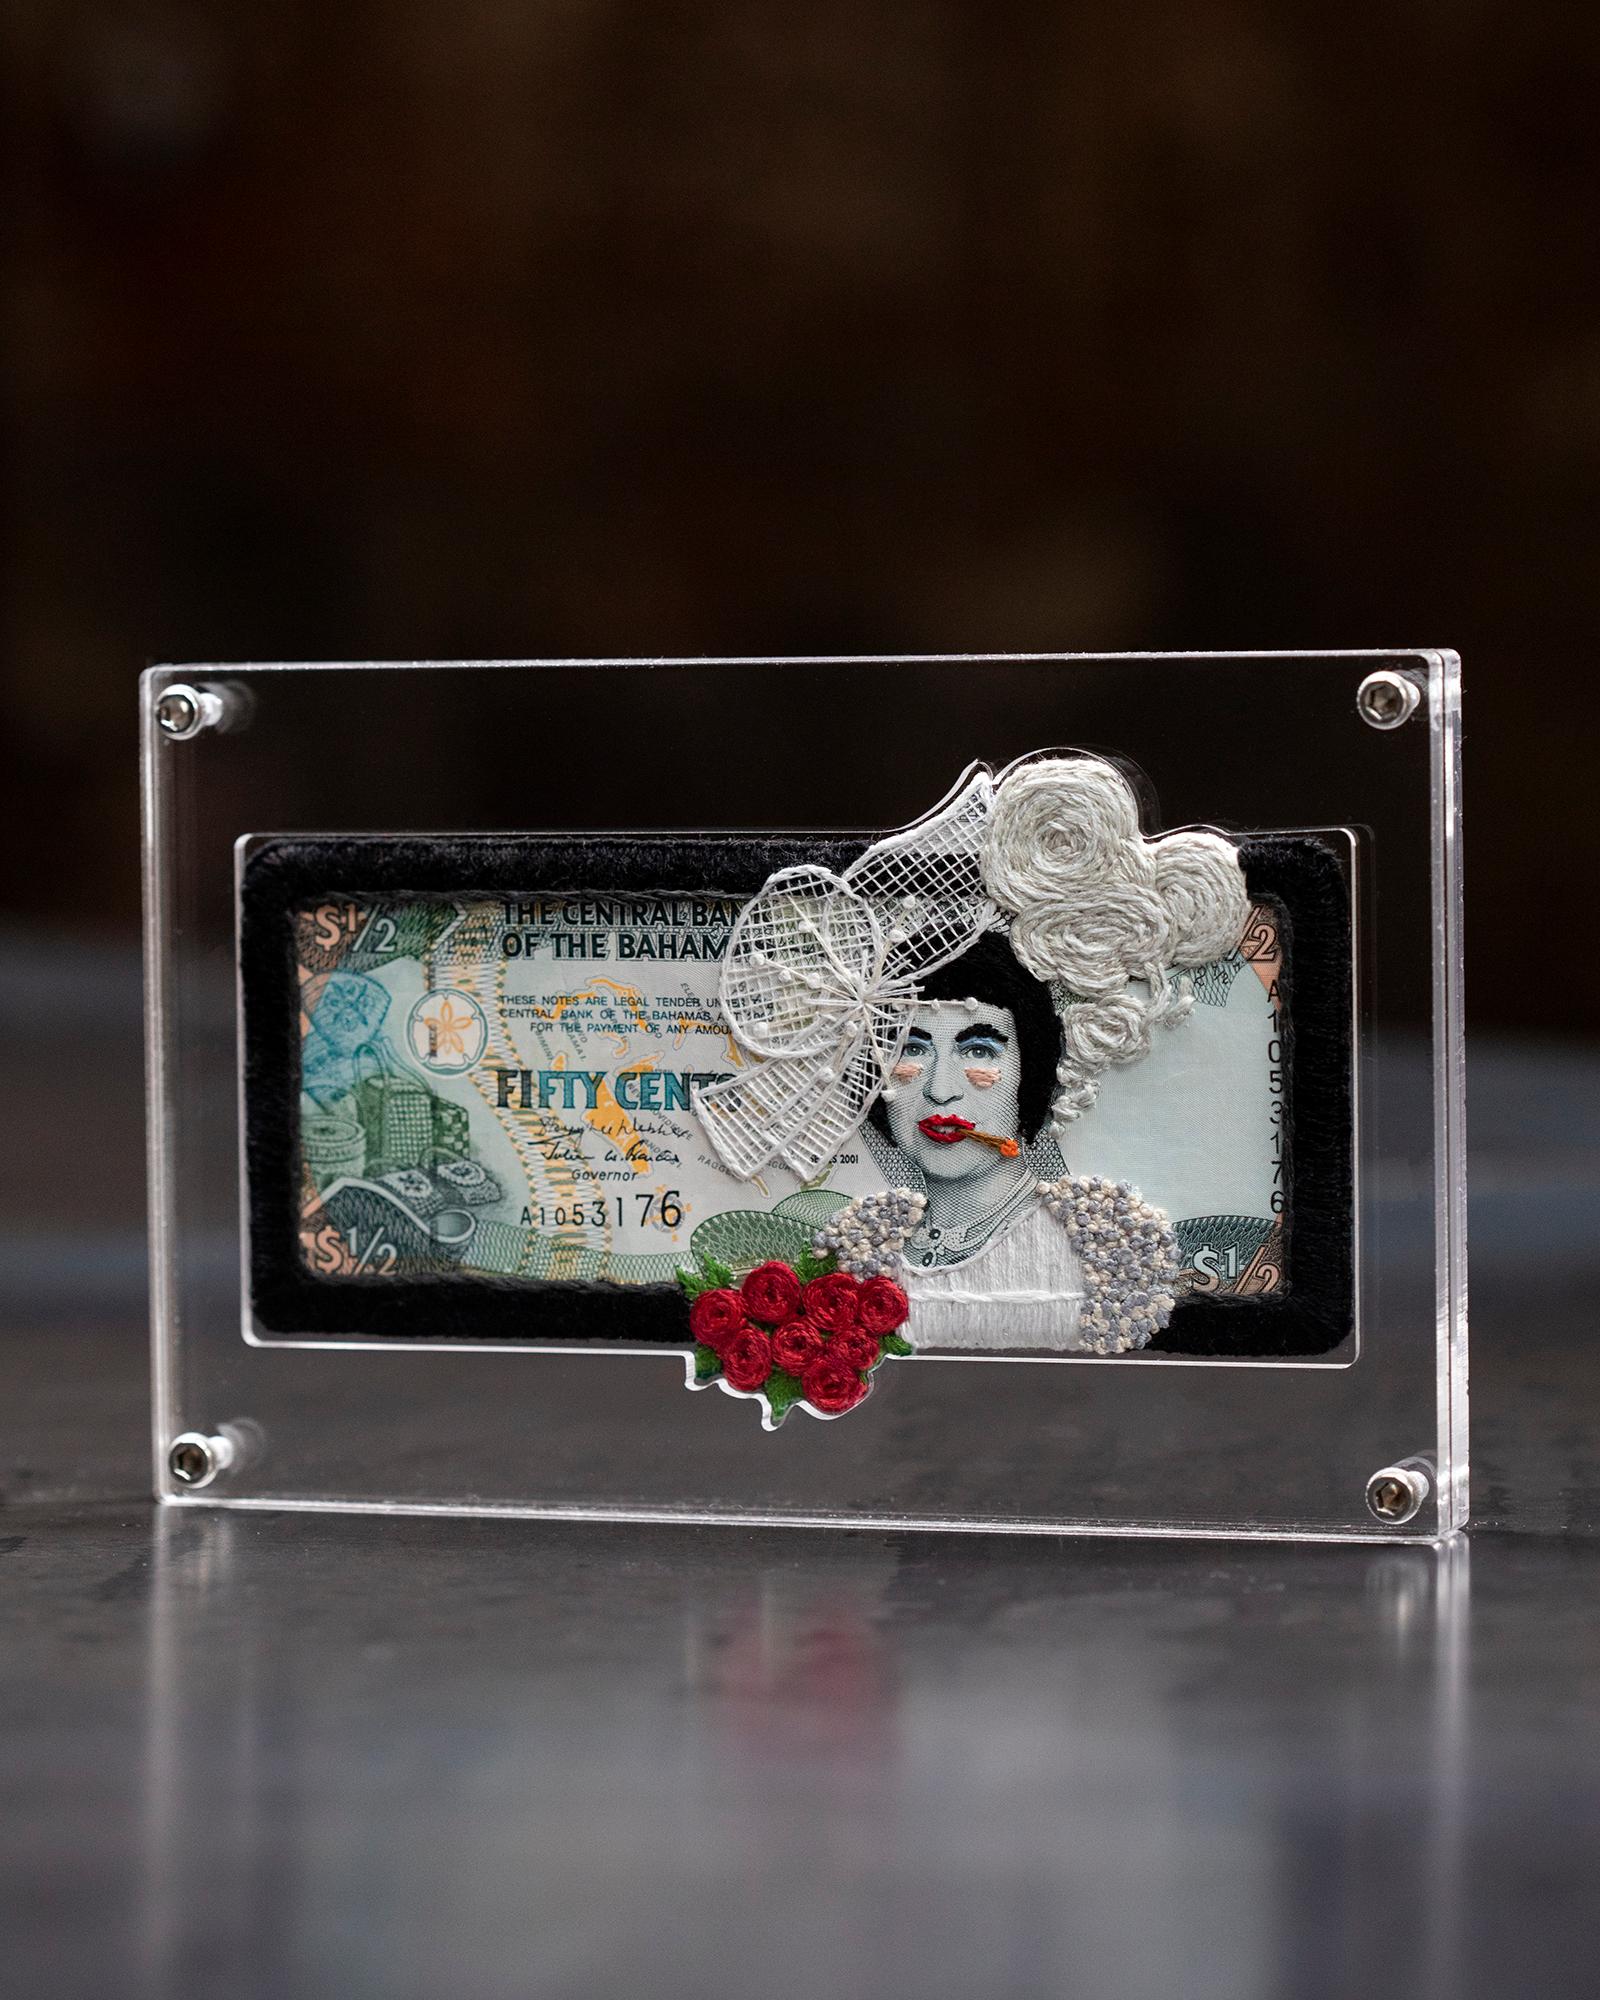 Fifty Cents Bride - Mixed Media Art by Stacey Lee Webber